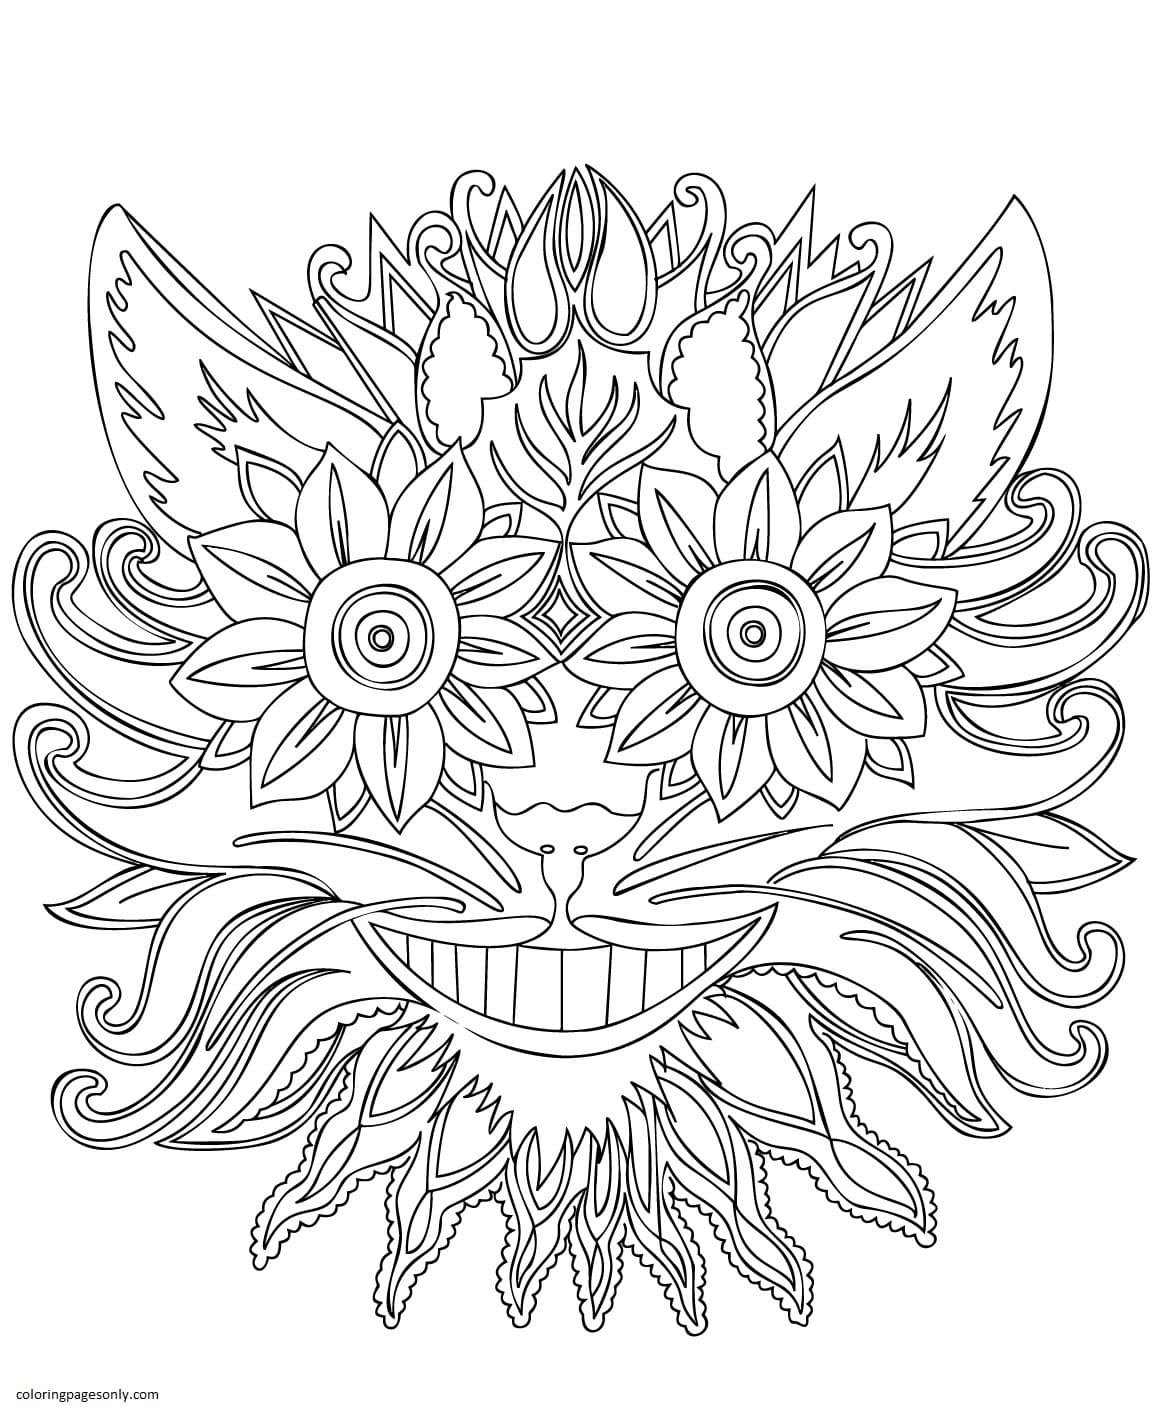 Cheshire Cat Zentangle Coloring Page